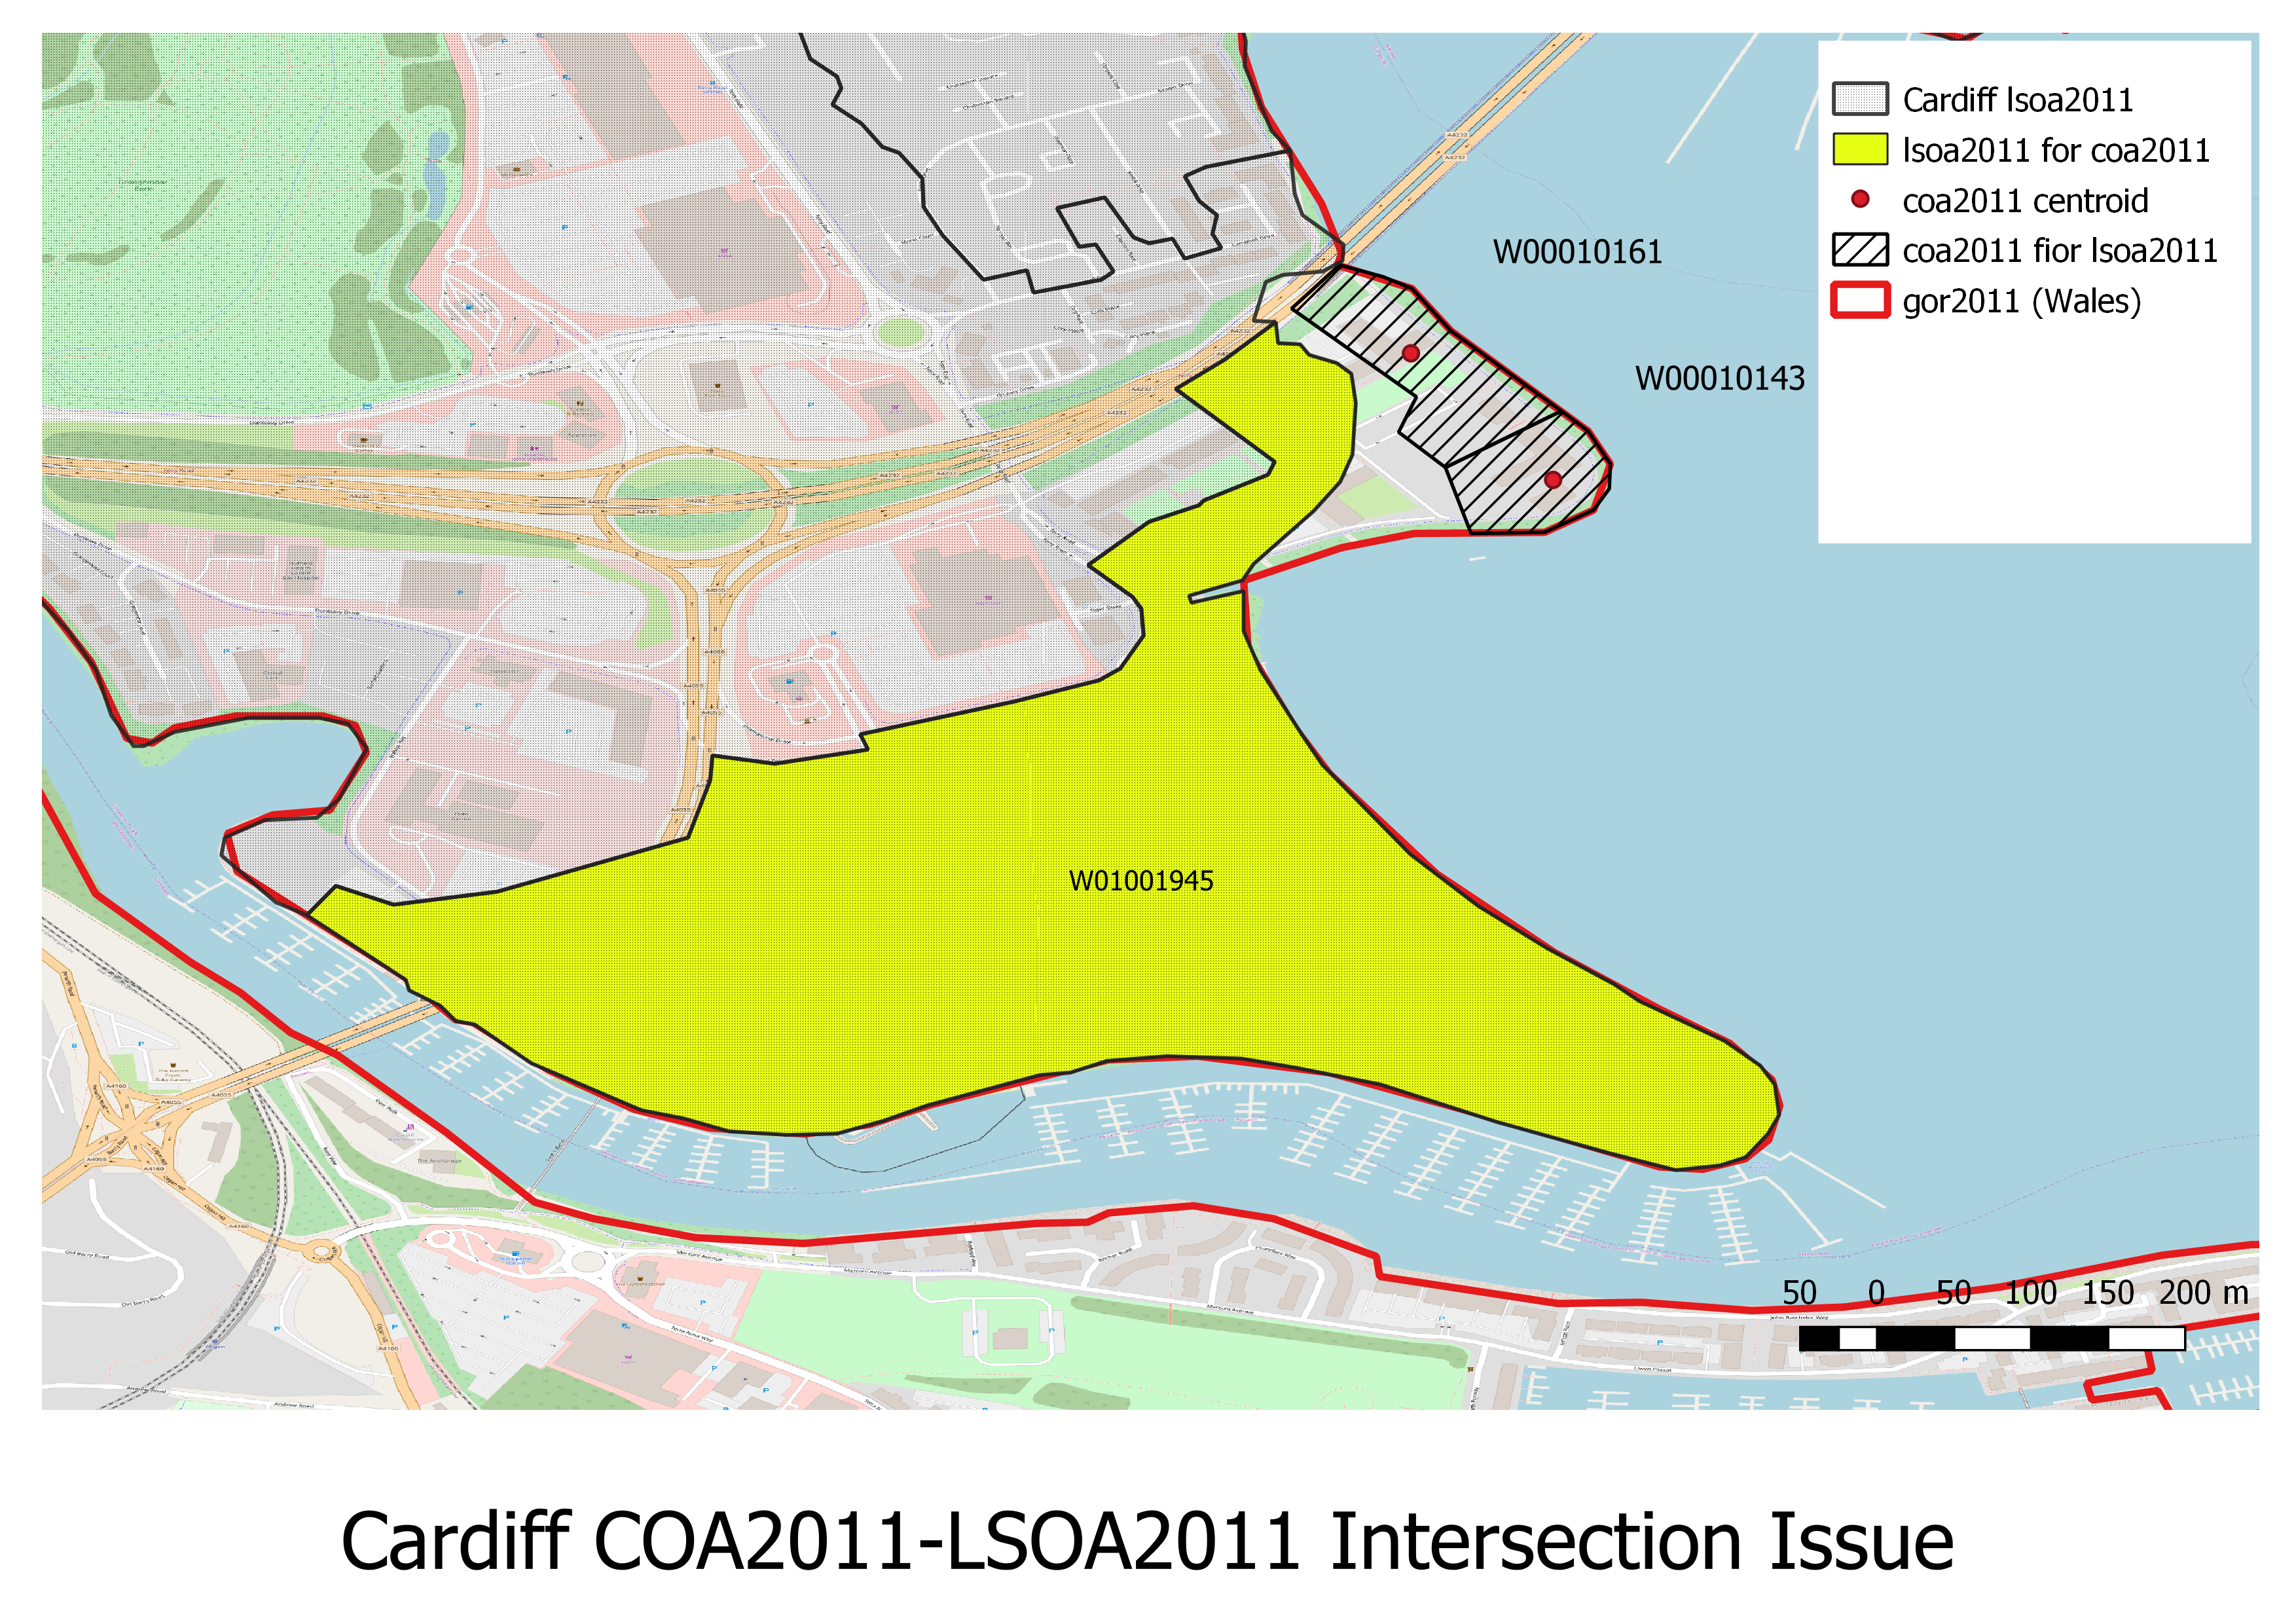 Cardiff COA2001 intersection issue map